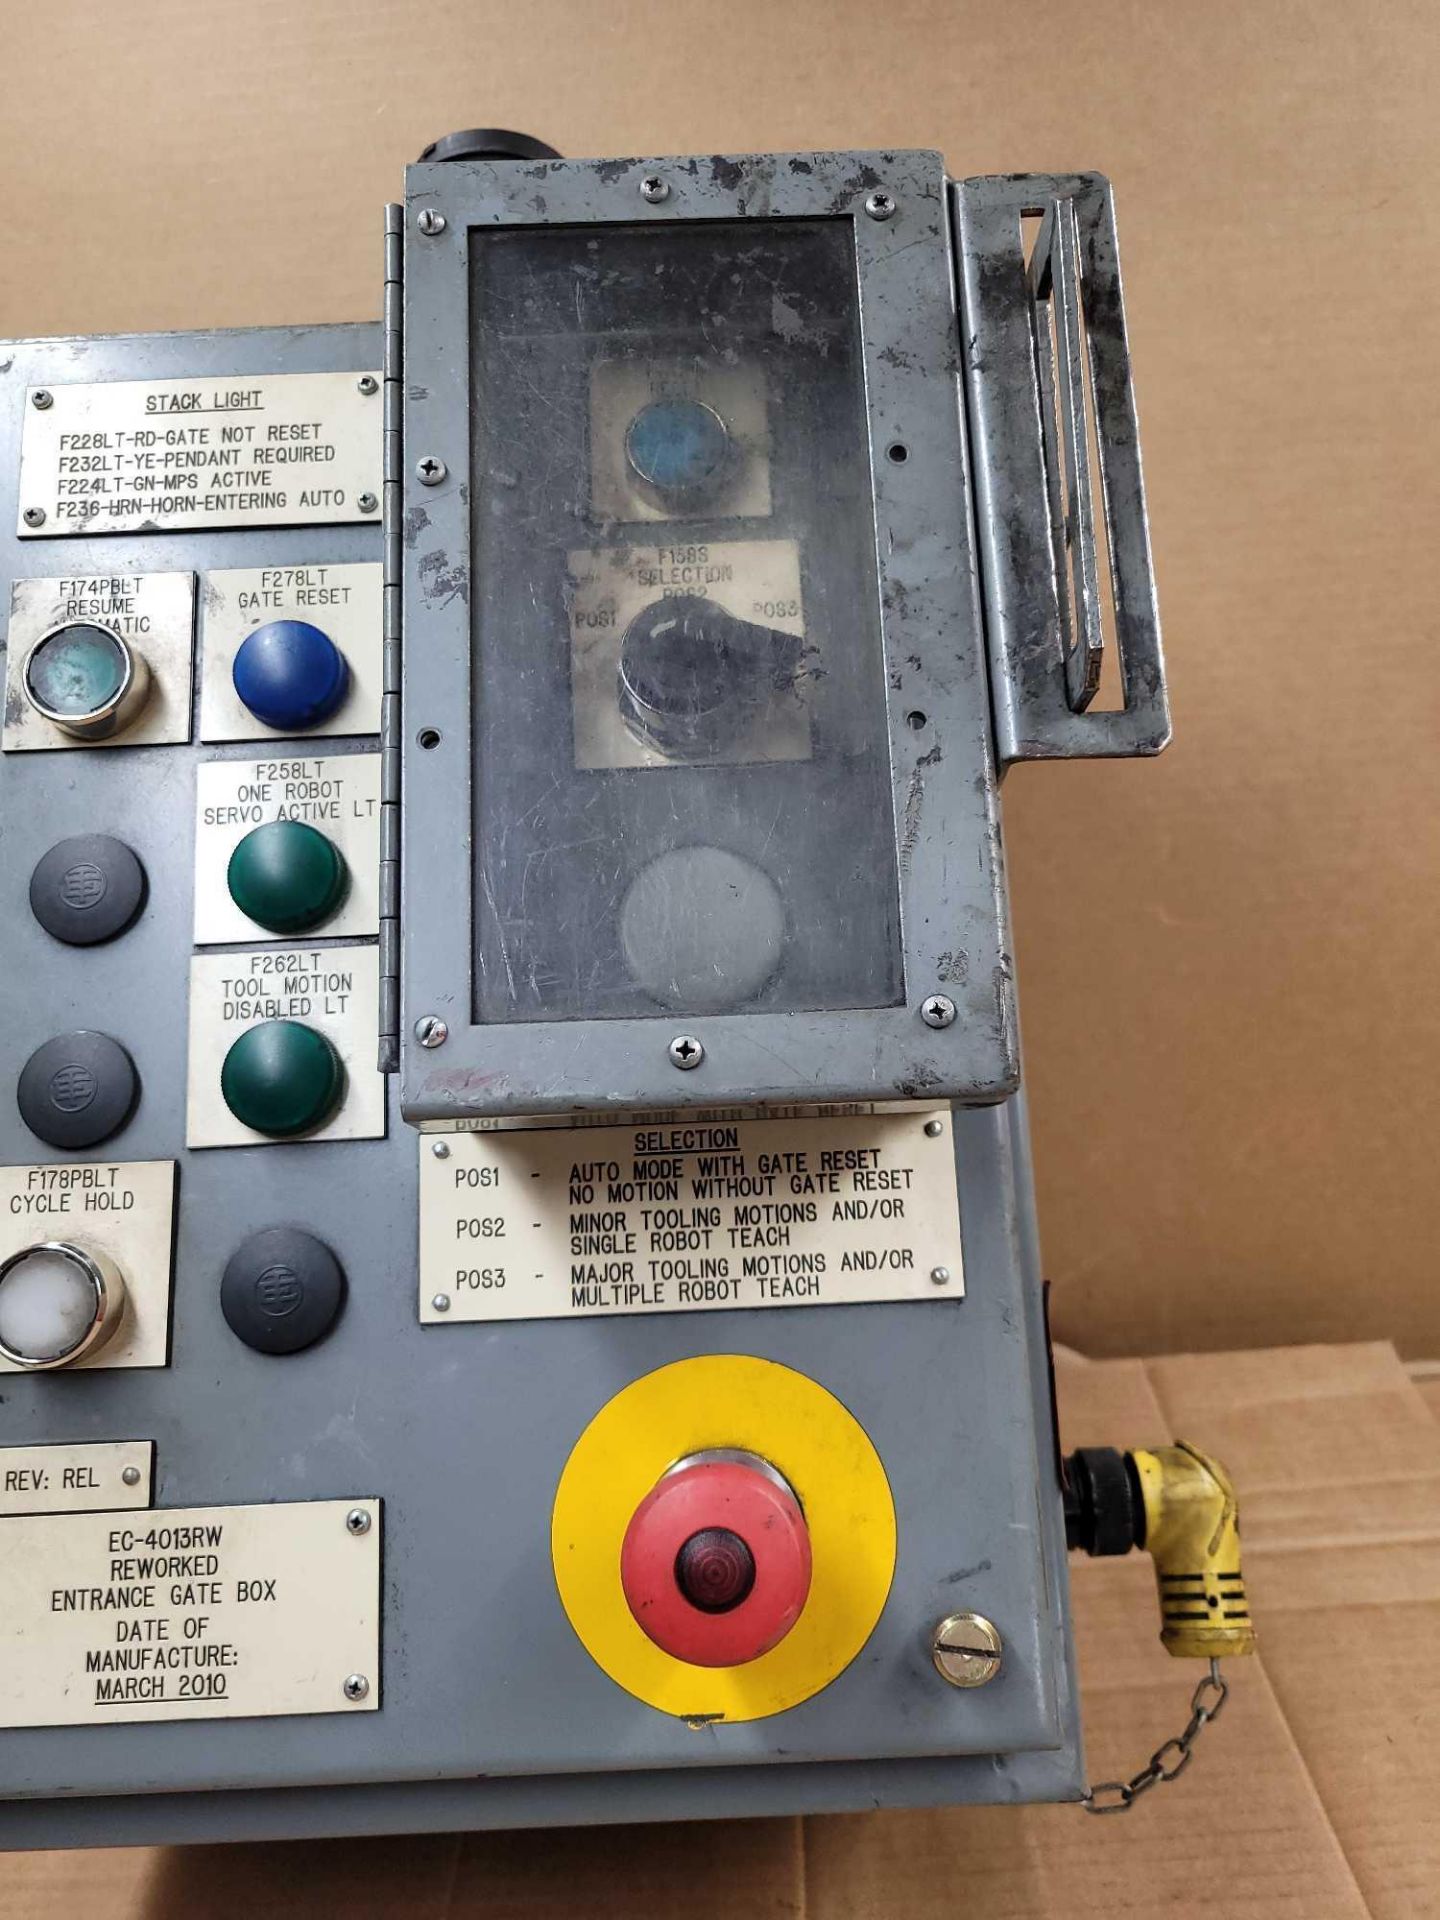 X-BAR AUTOMATION EC-4013RW / Reworked Entrance Gate Box  /  Lot Weight: 37.4 lbs - Image 4 of 13